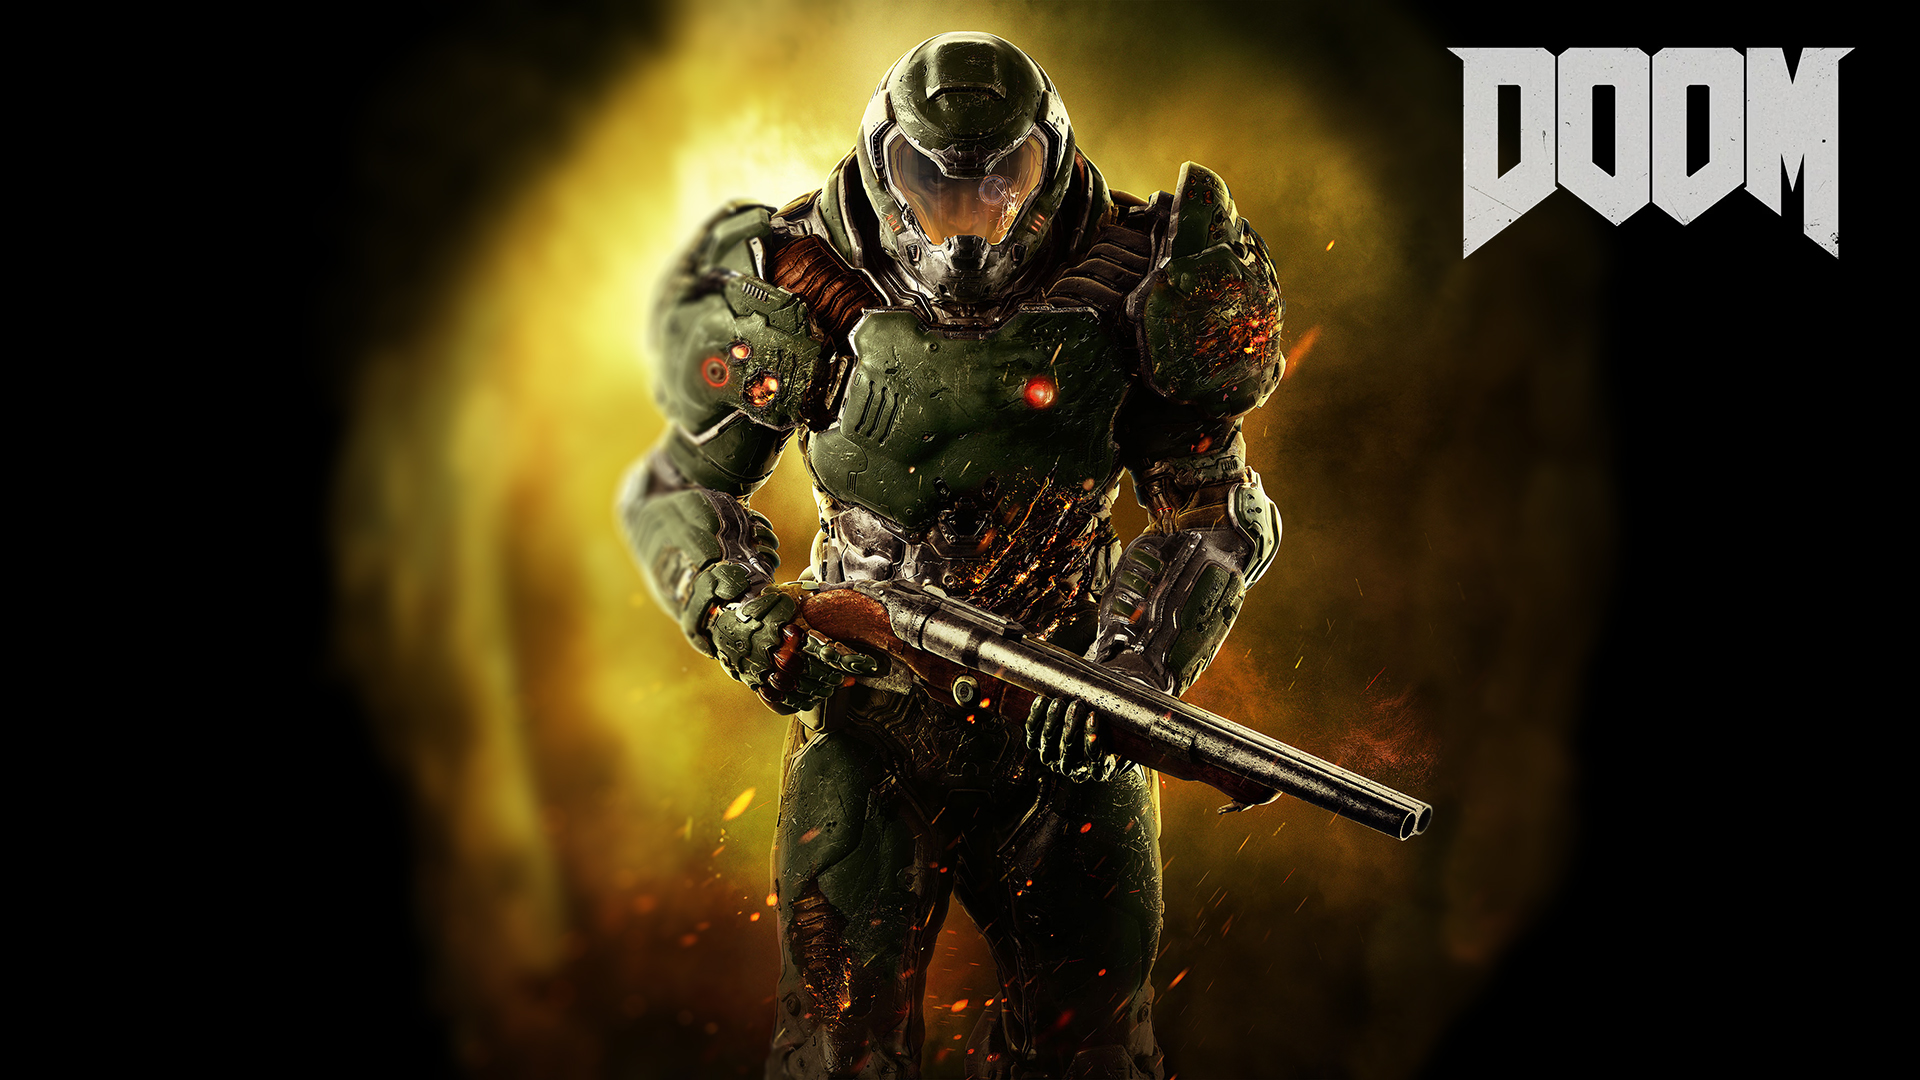 Doom Wallpaper Pictures To Pin